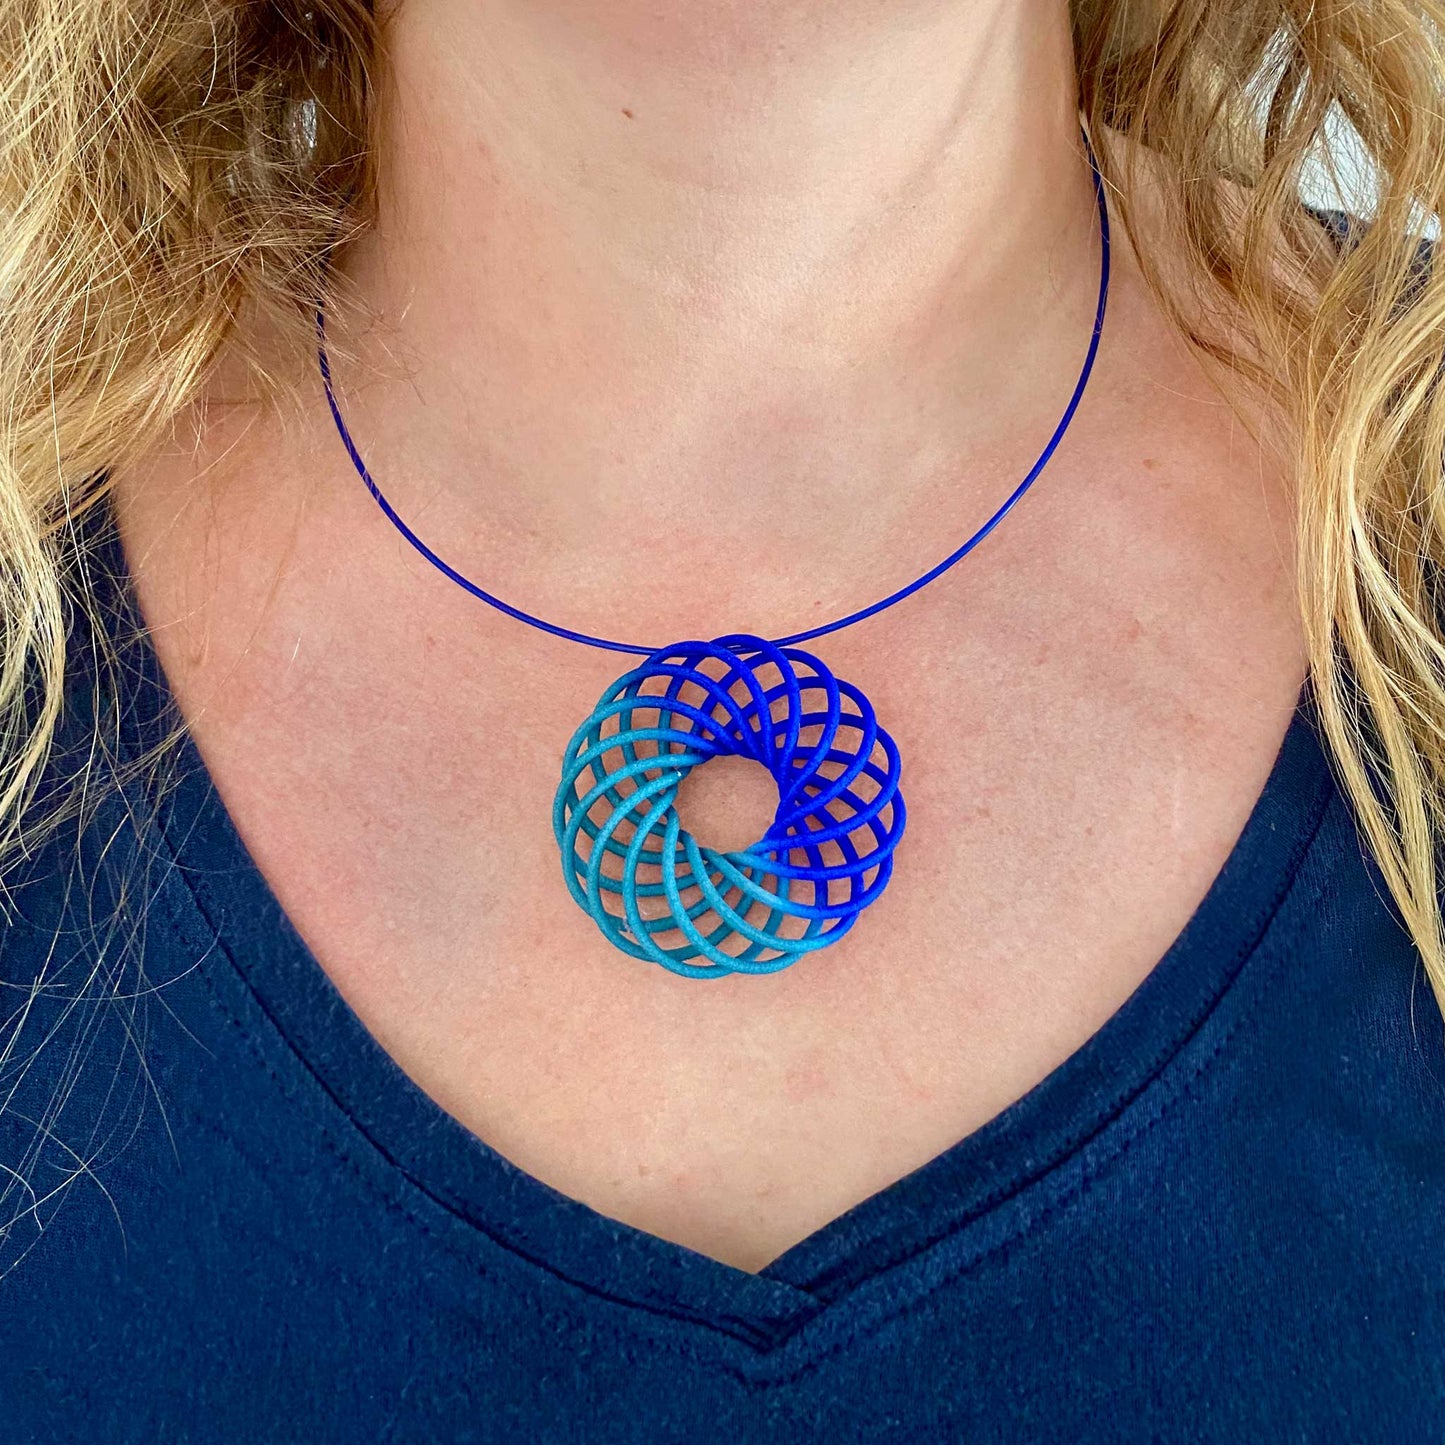 Katy wearing the Vortex 3D printed nylon pendant in blue to teal fade colour way